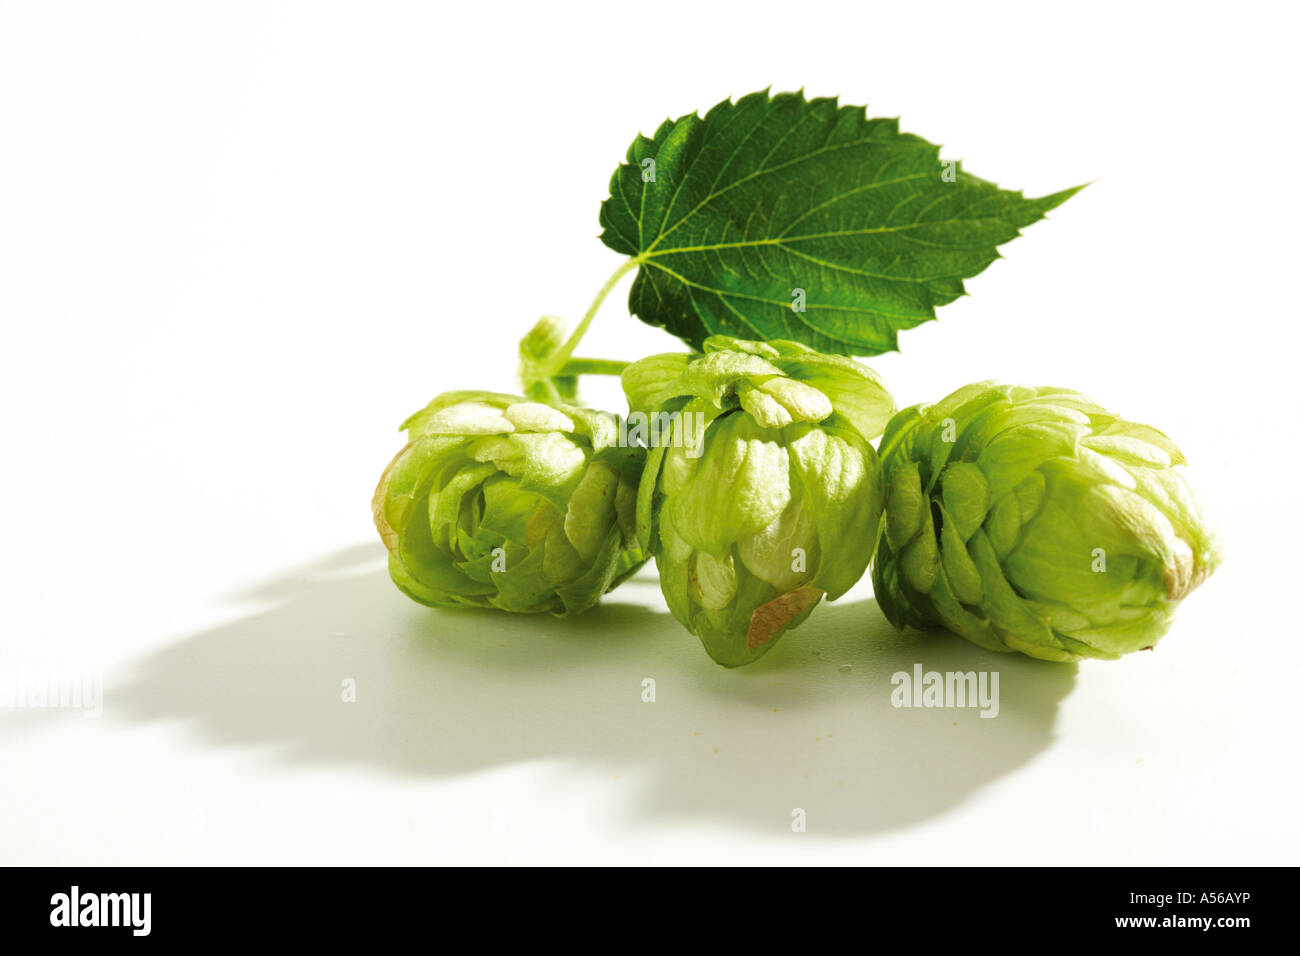 Two hop umbels, close-up Stock Photo